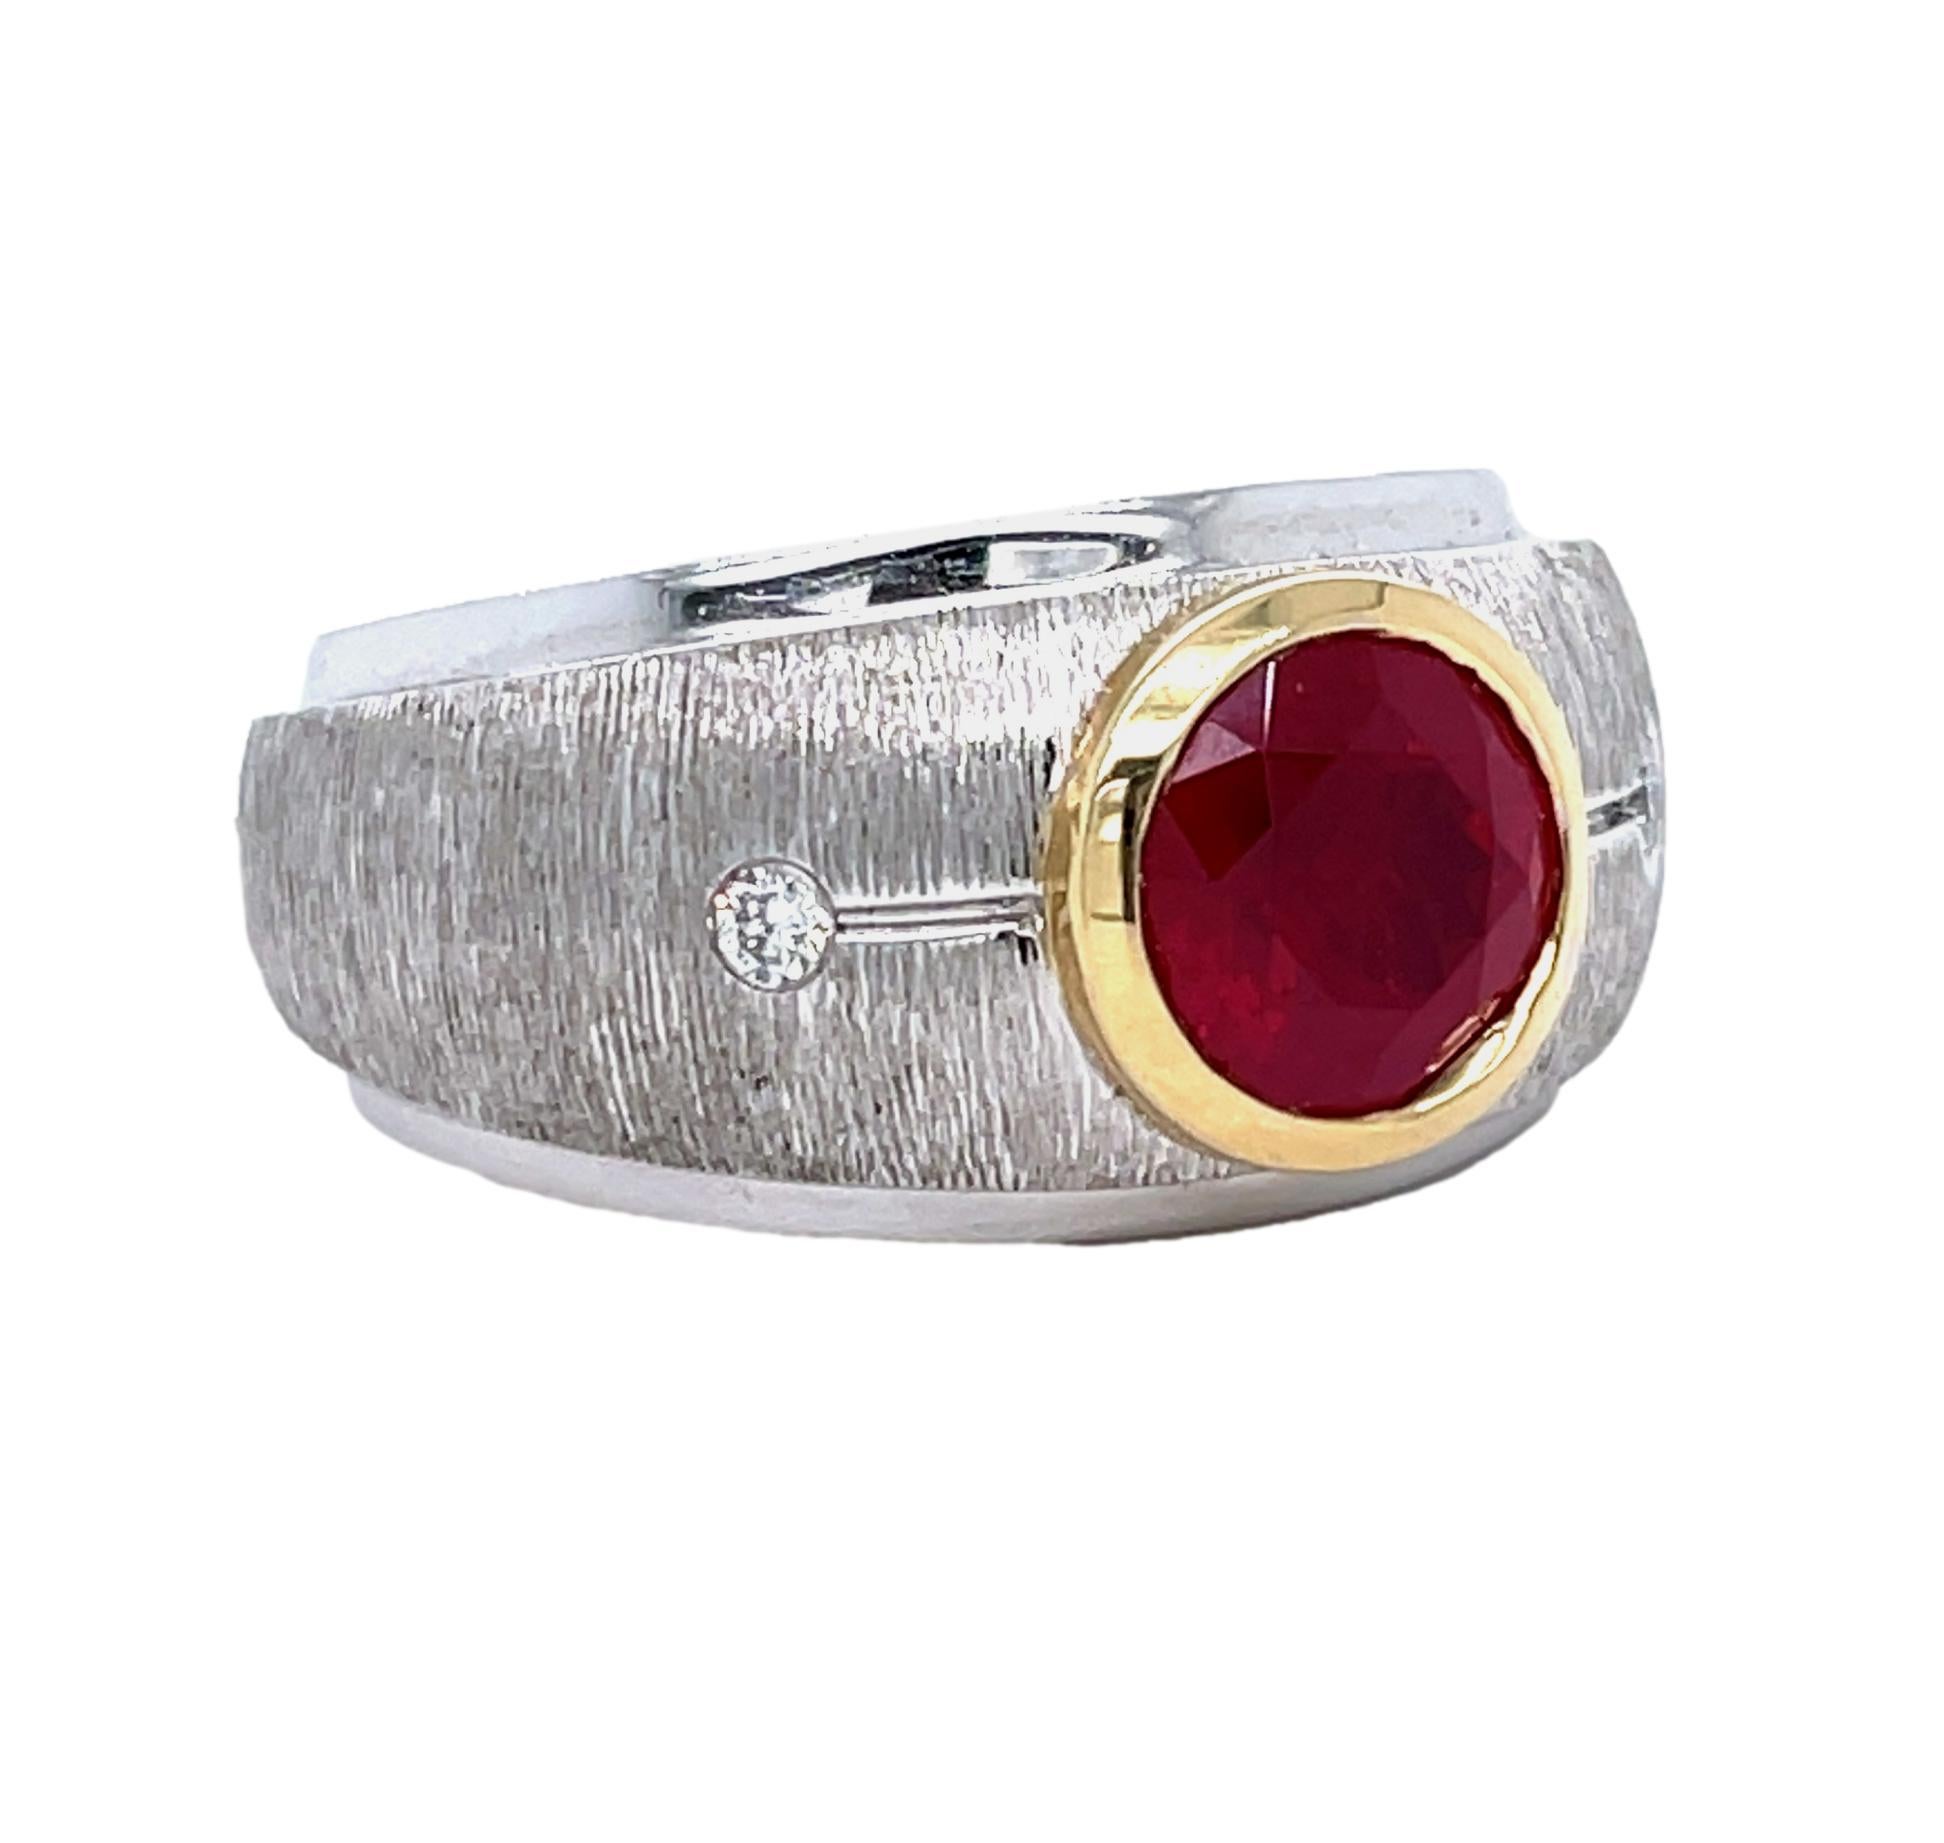 This unique Men's ring has a deep red top quality round Spinel center with two brilliant cut diamonds  on the side. This ring is two tone with 14K yellow gold around the Spinel and 14K white gold band. It comes with detailed tags and shipped in a